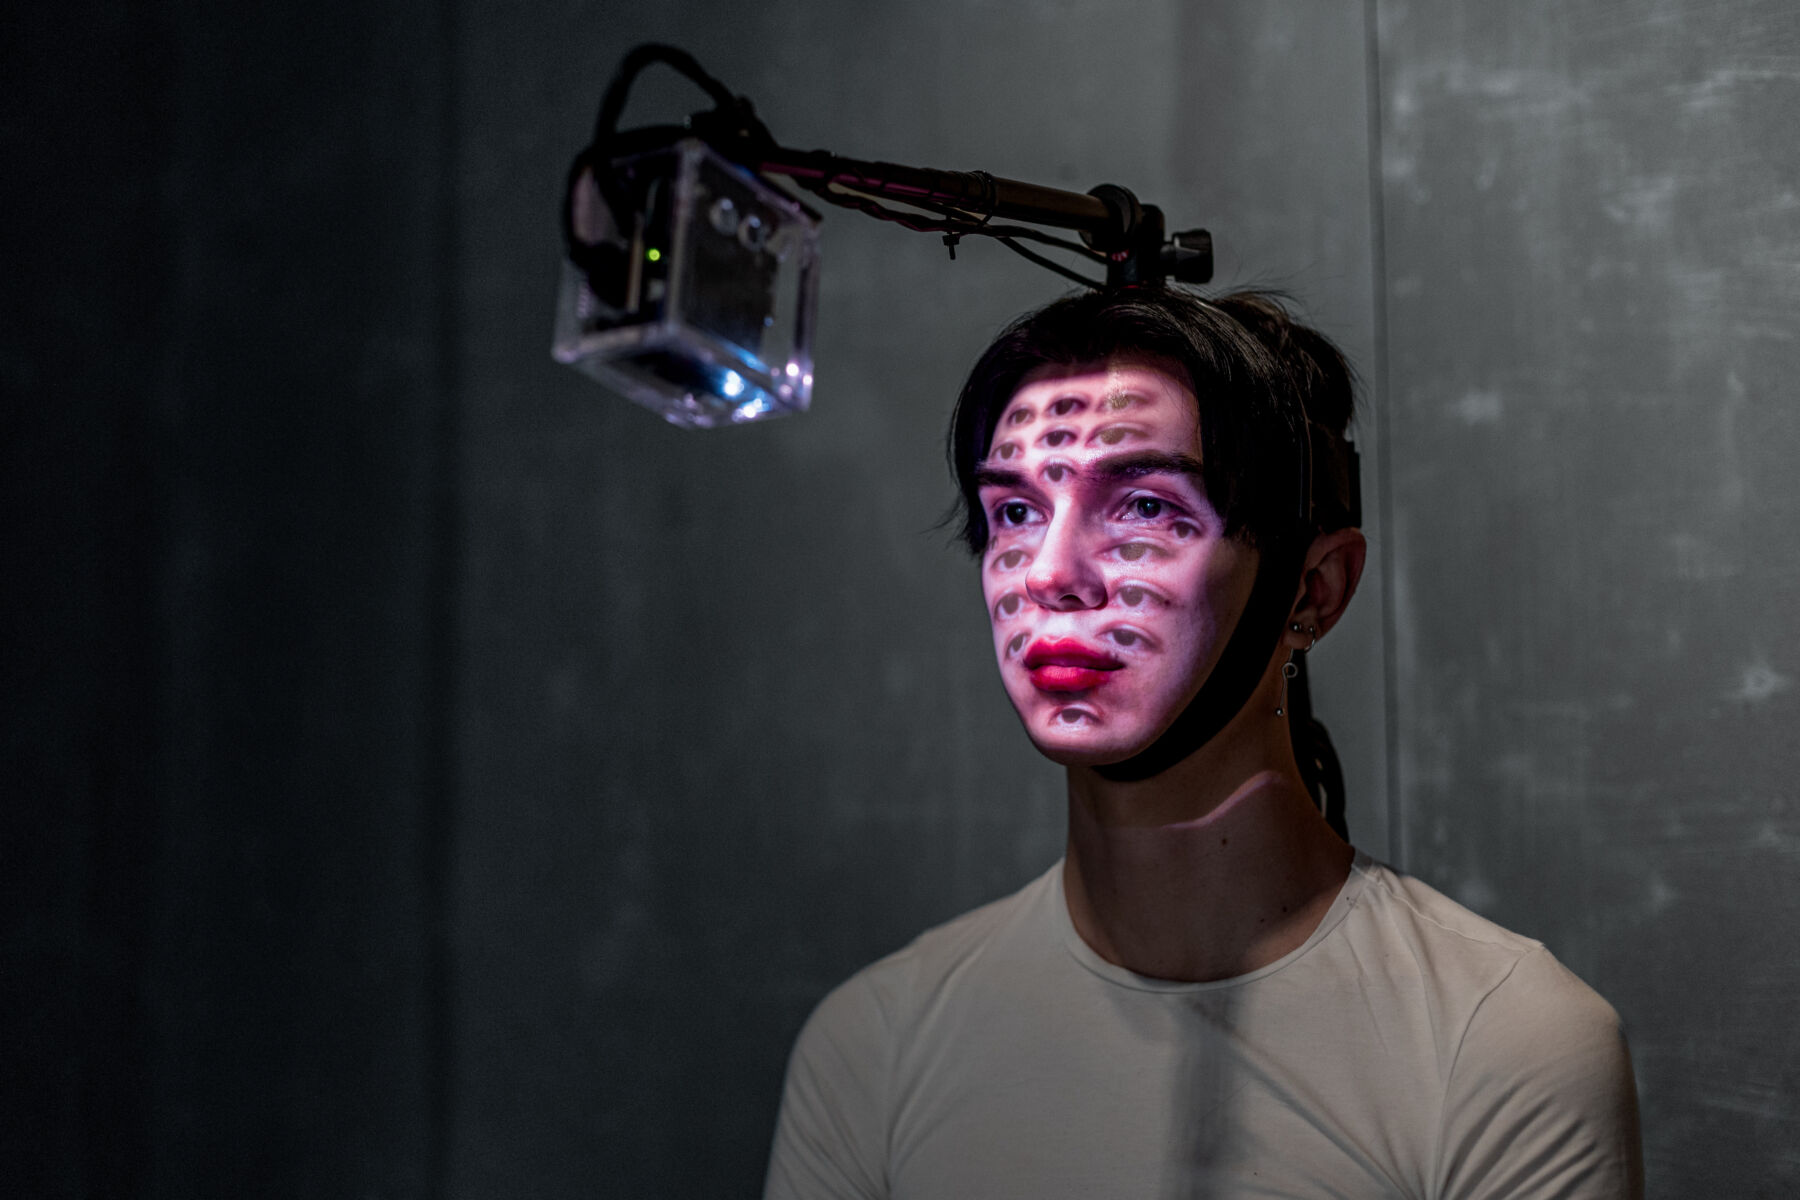 filip custic a face with projections